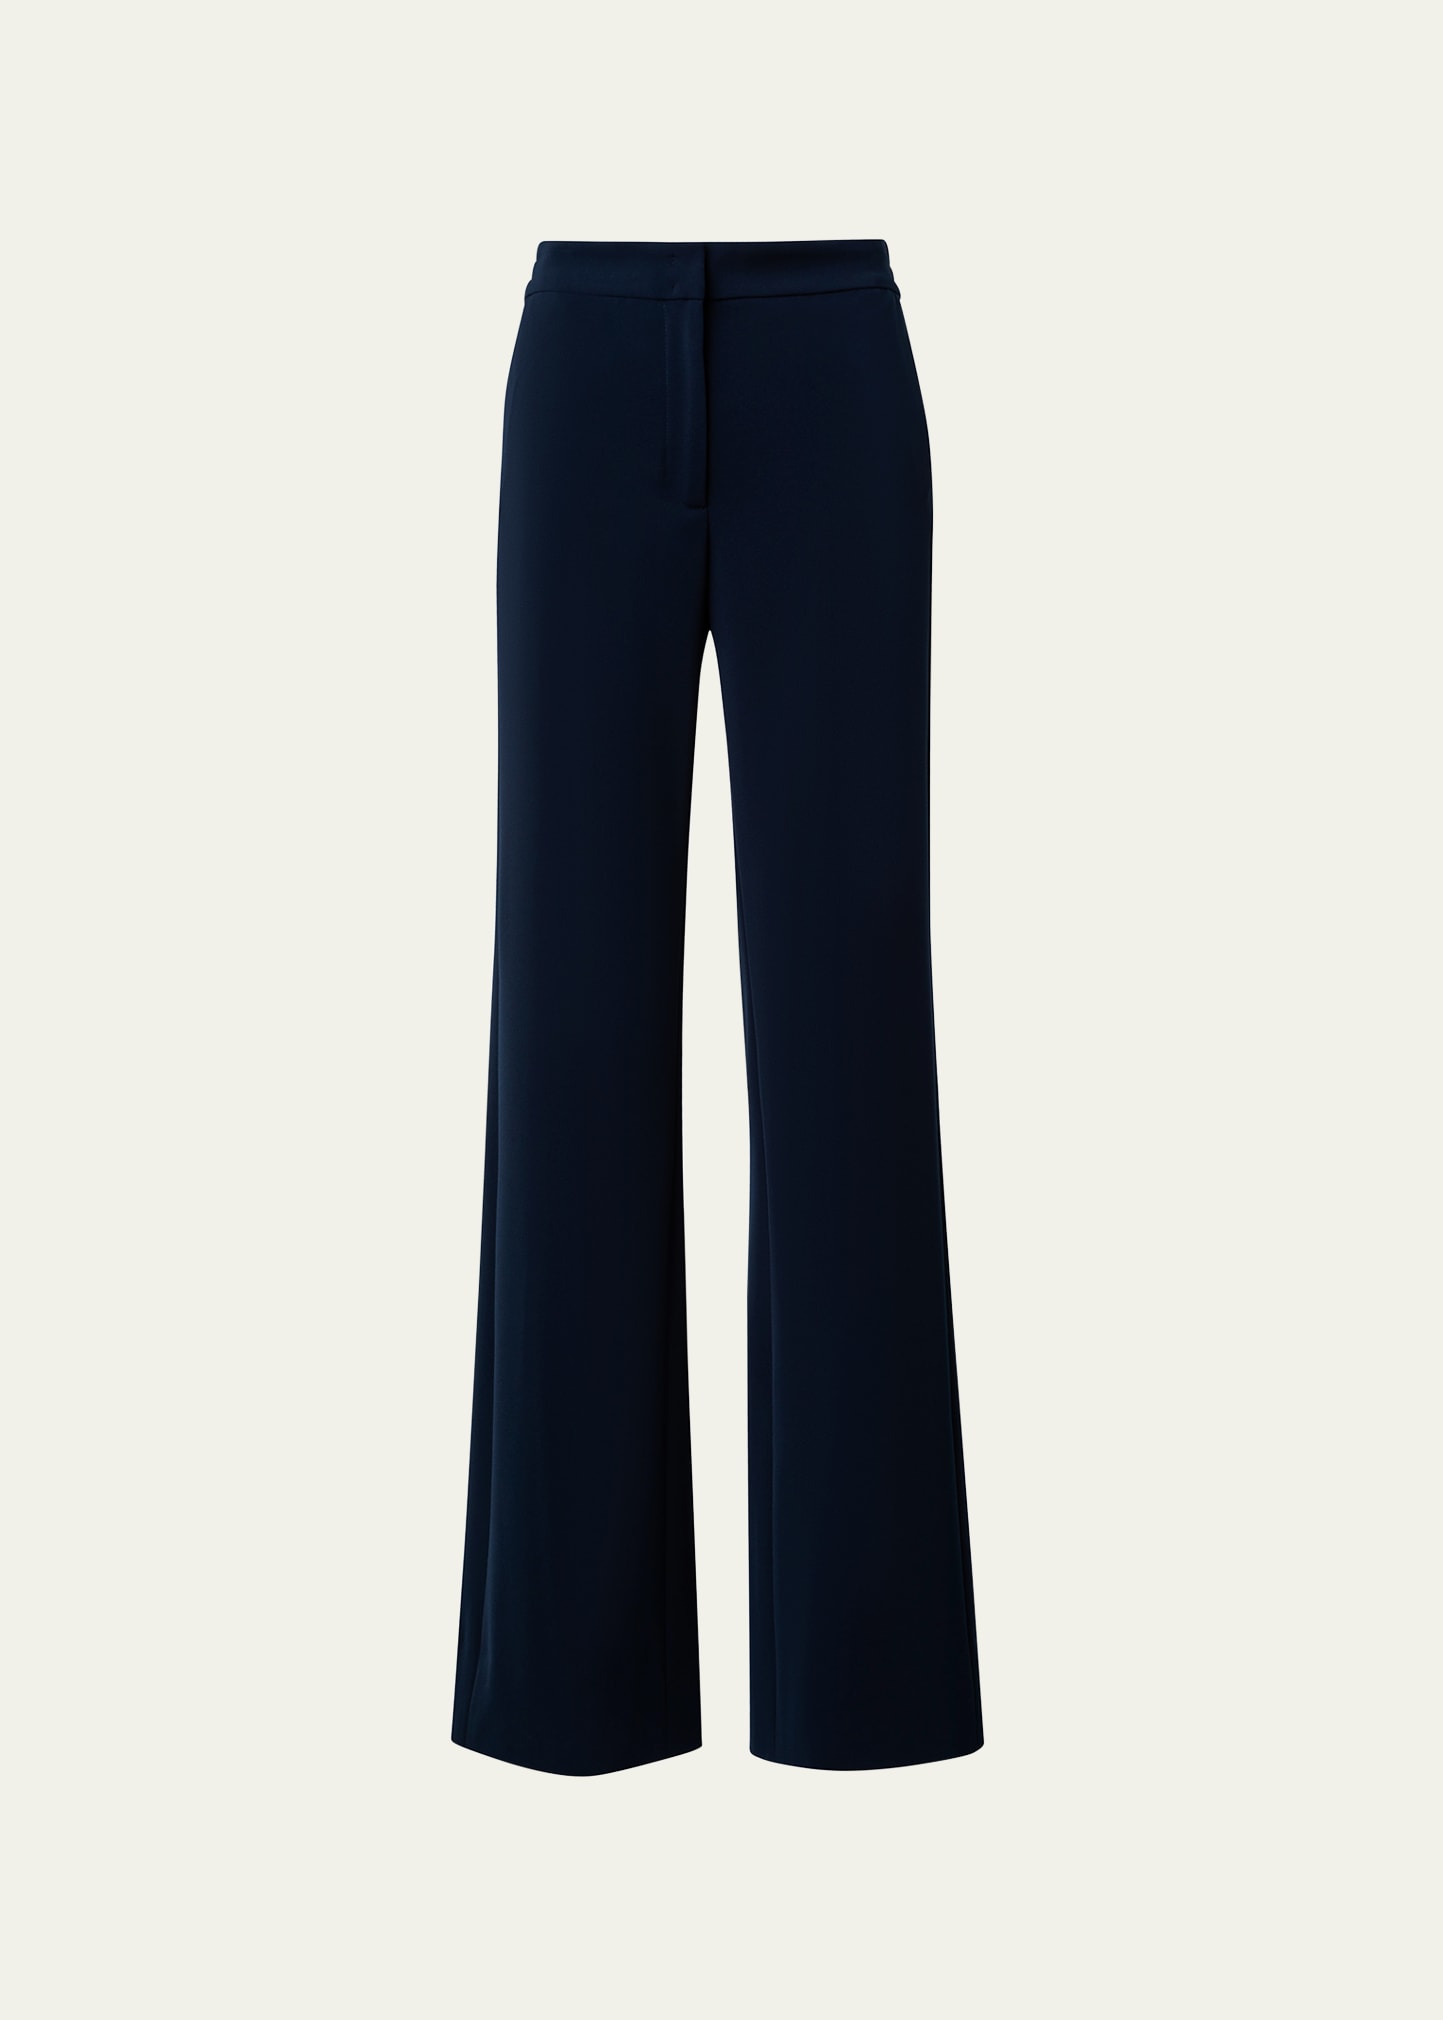 Akris Punto Marla Lightweight Crepe Trousers In Navy